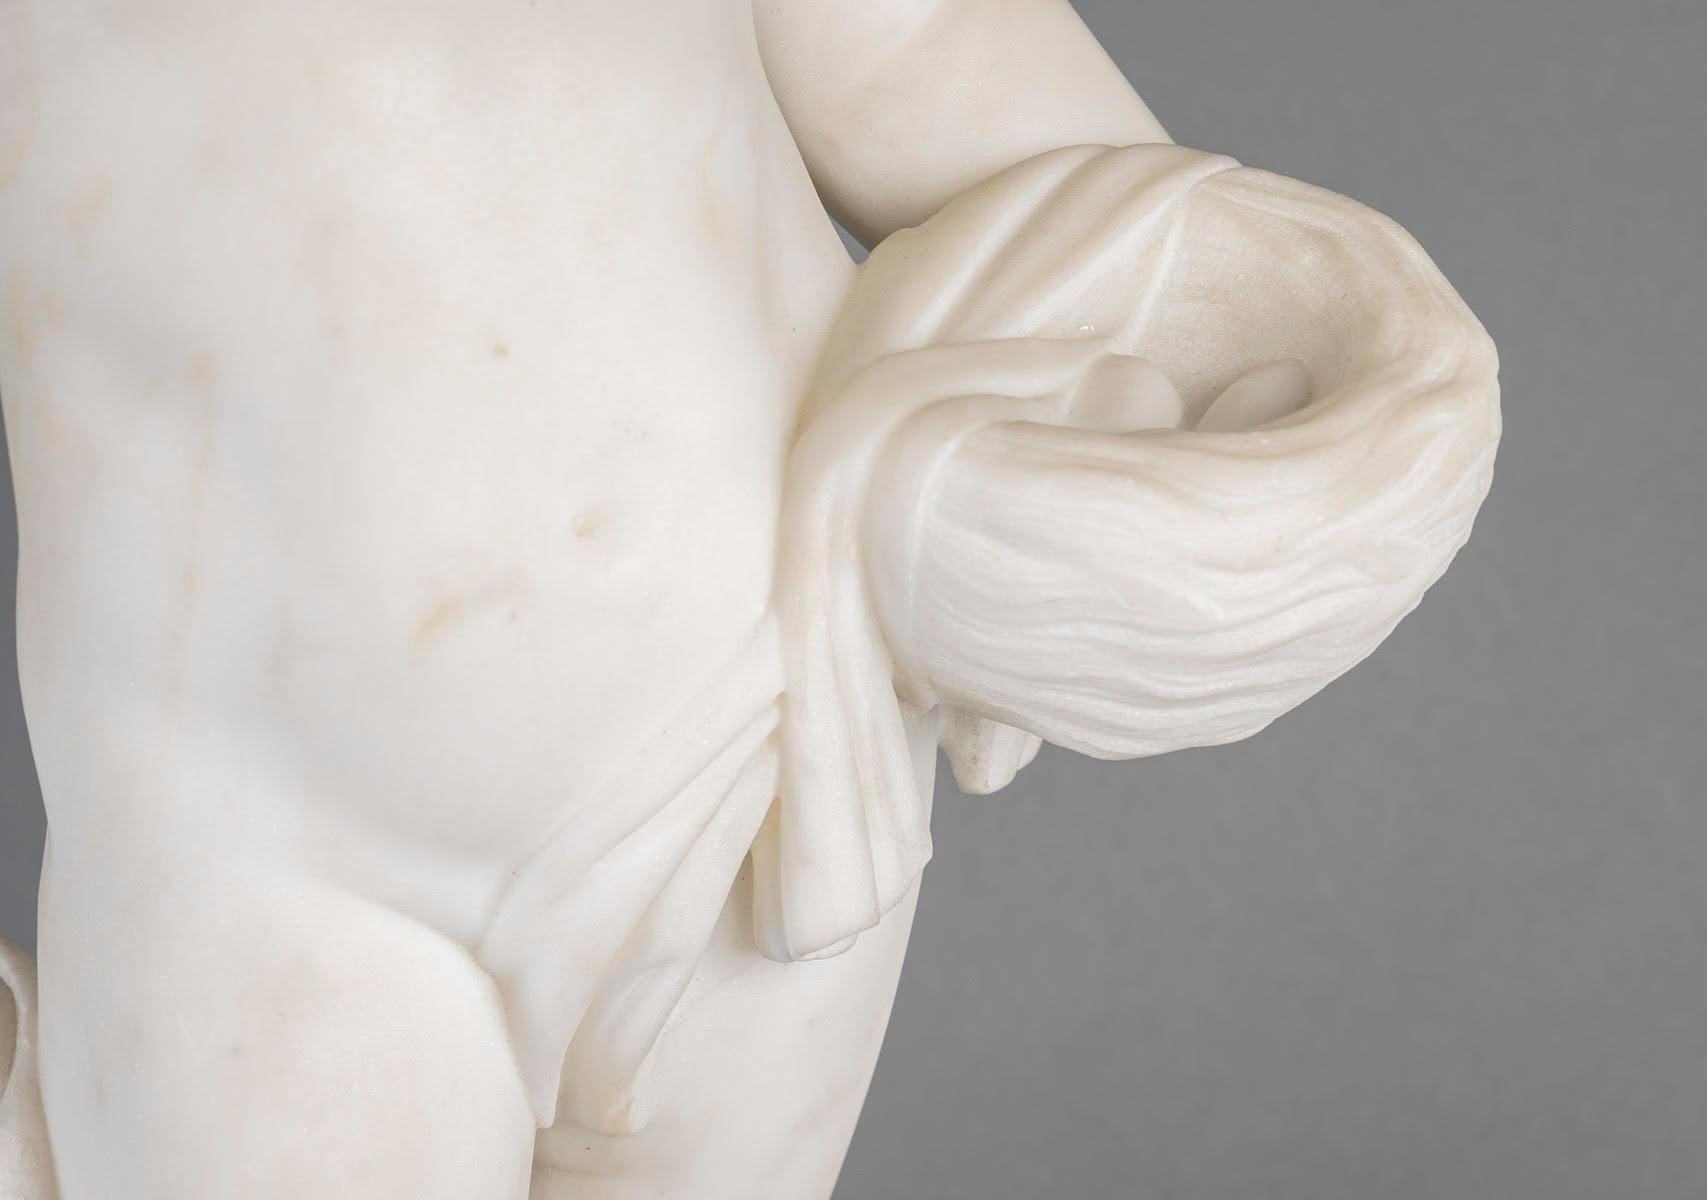 French Sculpture in White Carrara Marble, Napoleon III Period, 19th Century. For Sale